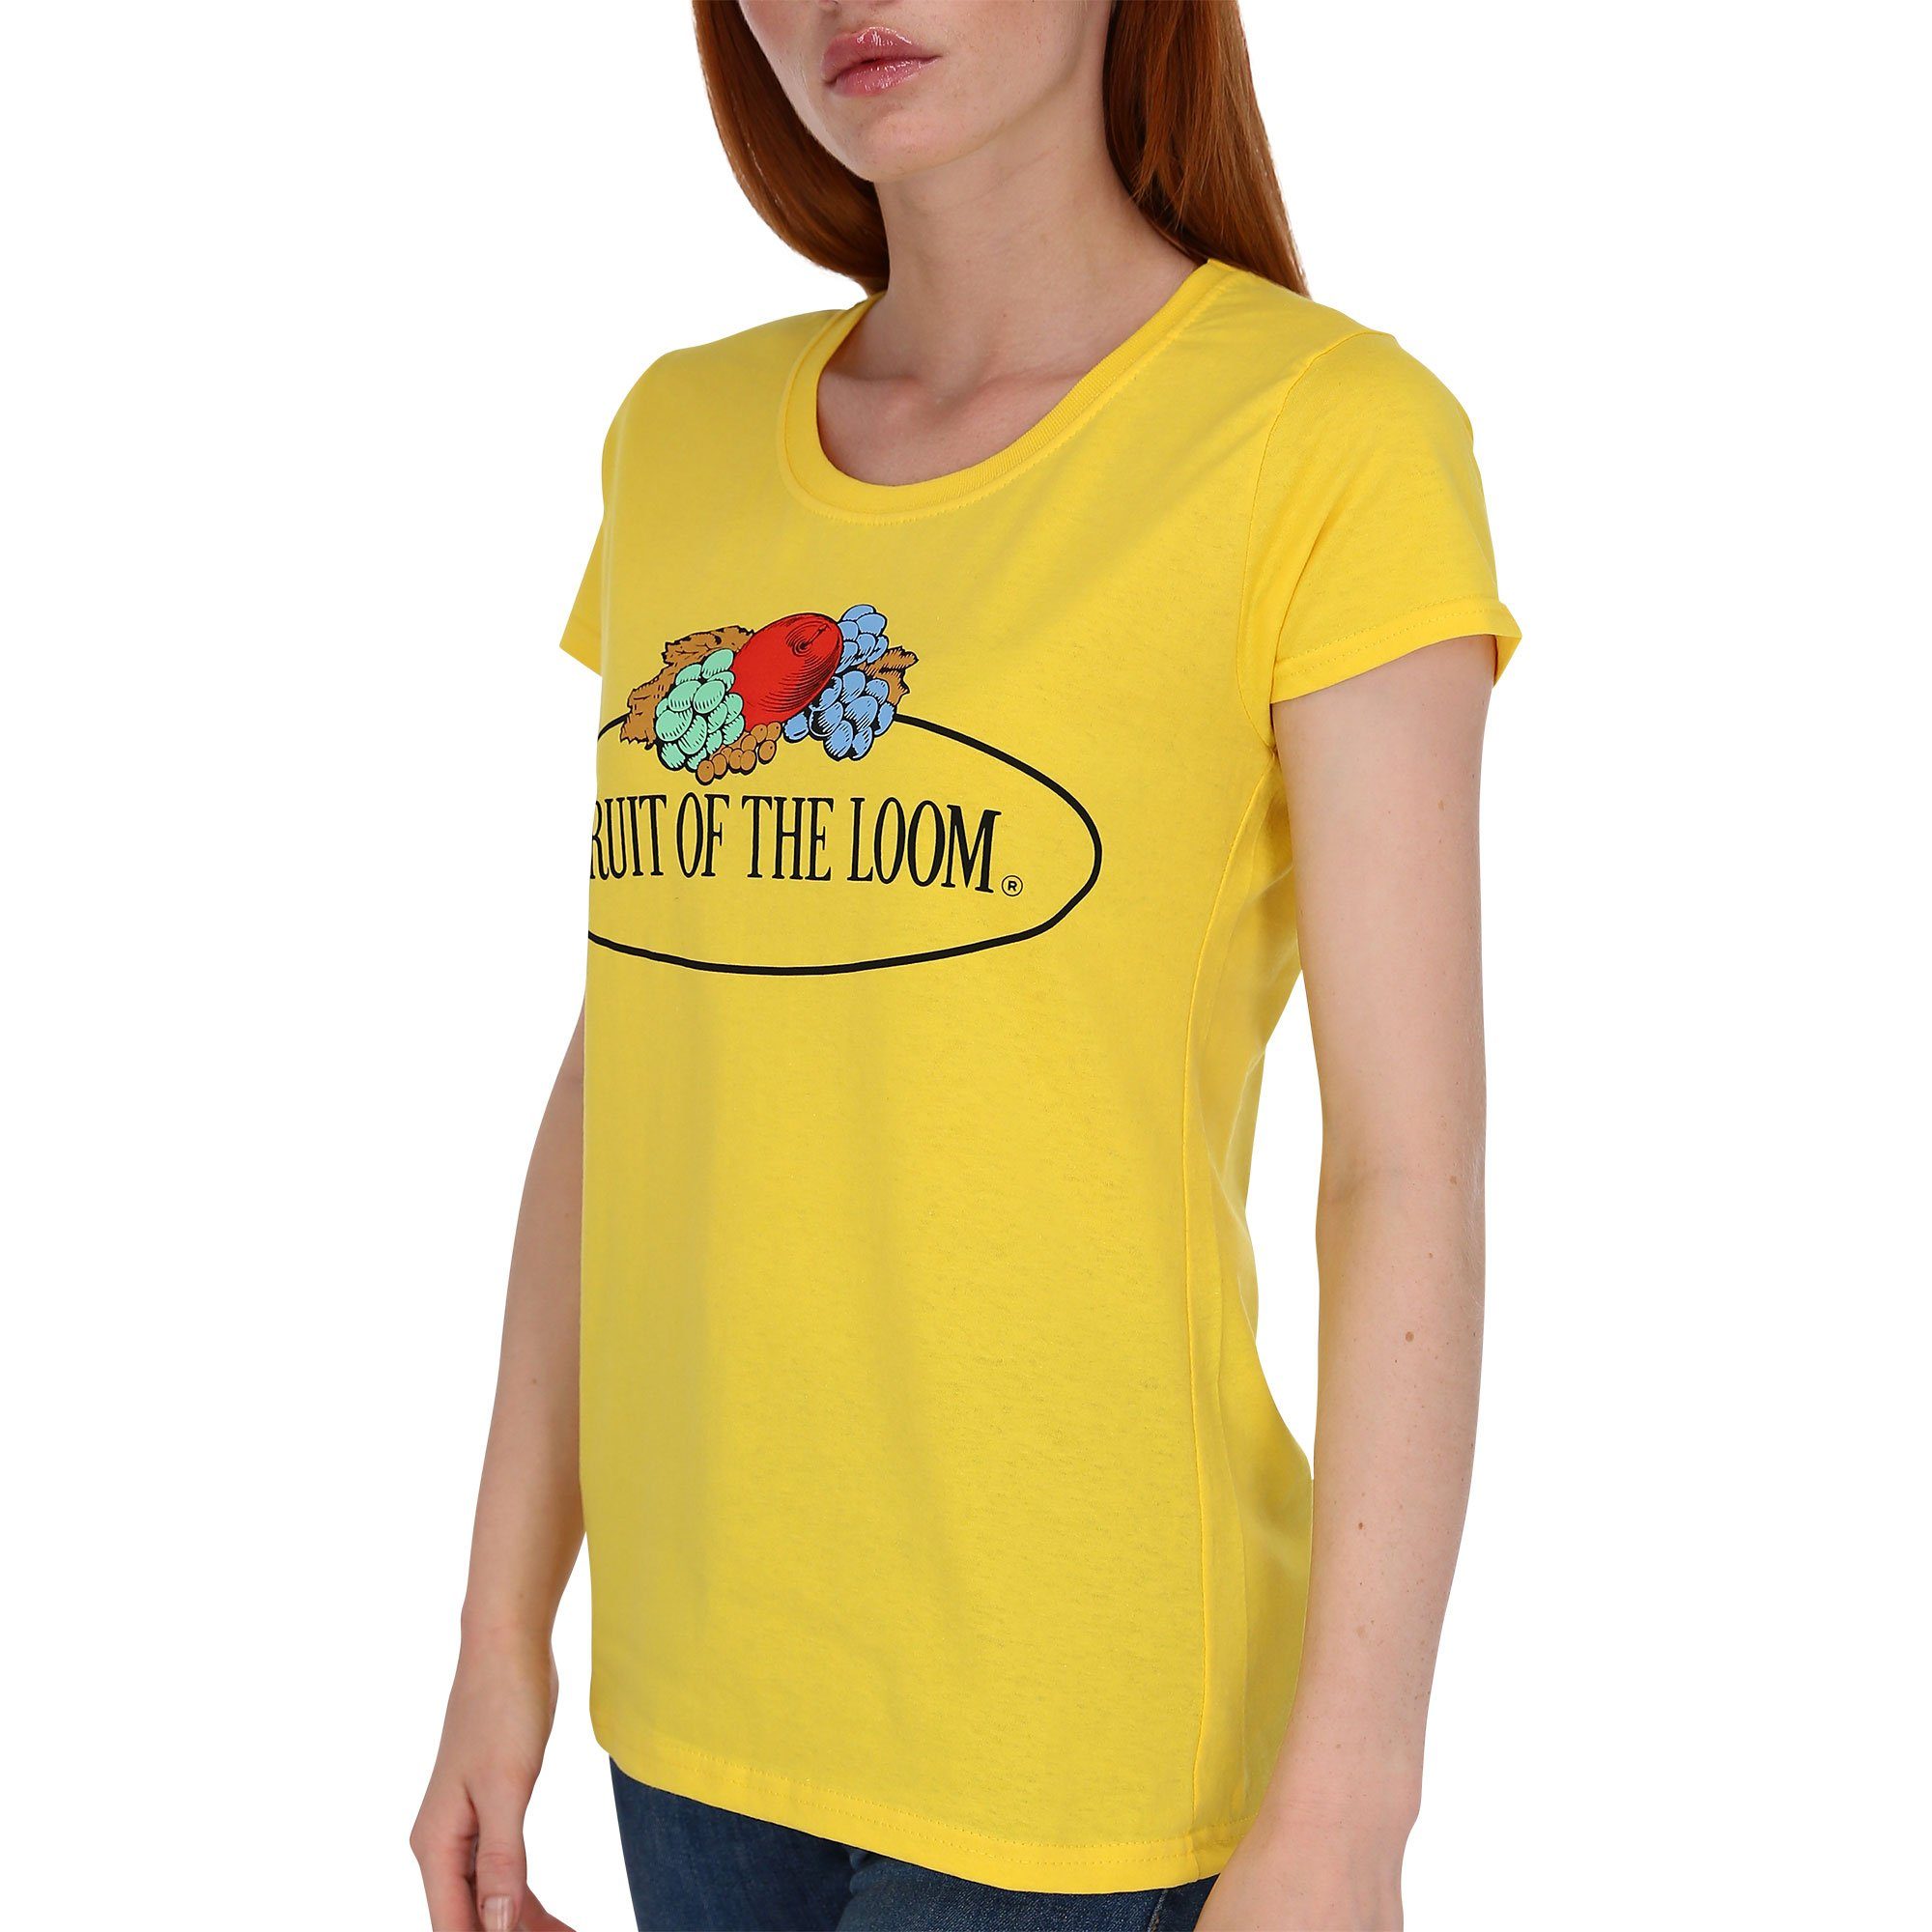 Fruit of the Loom Rundhalsshirt Fruit of the Loom Fruit of the Loom Damen T-Shirt mit Logo gelb